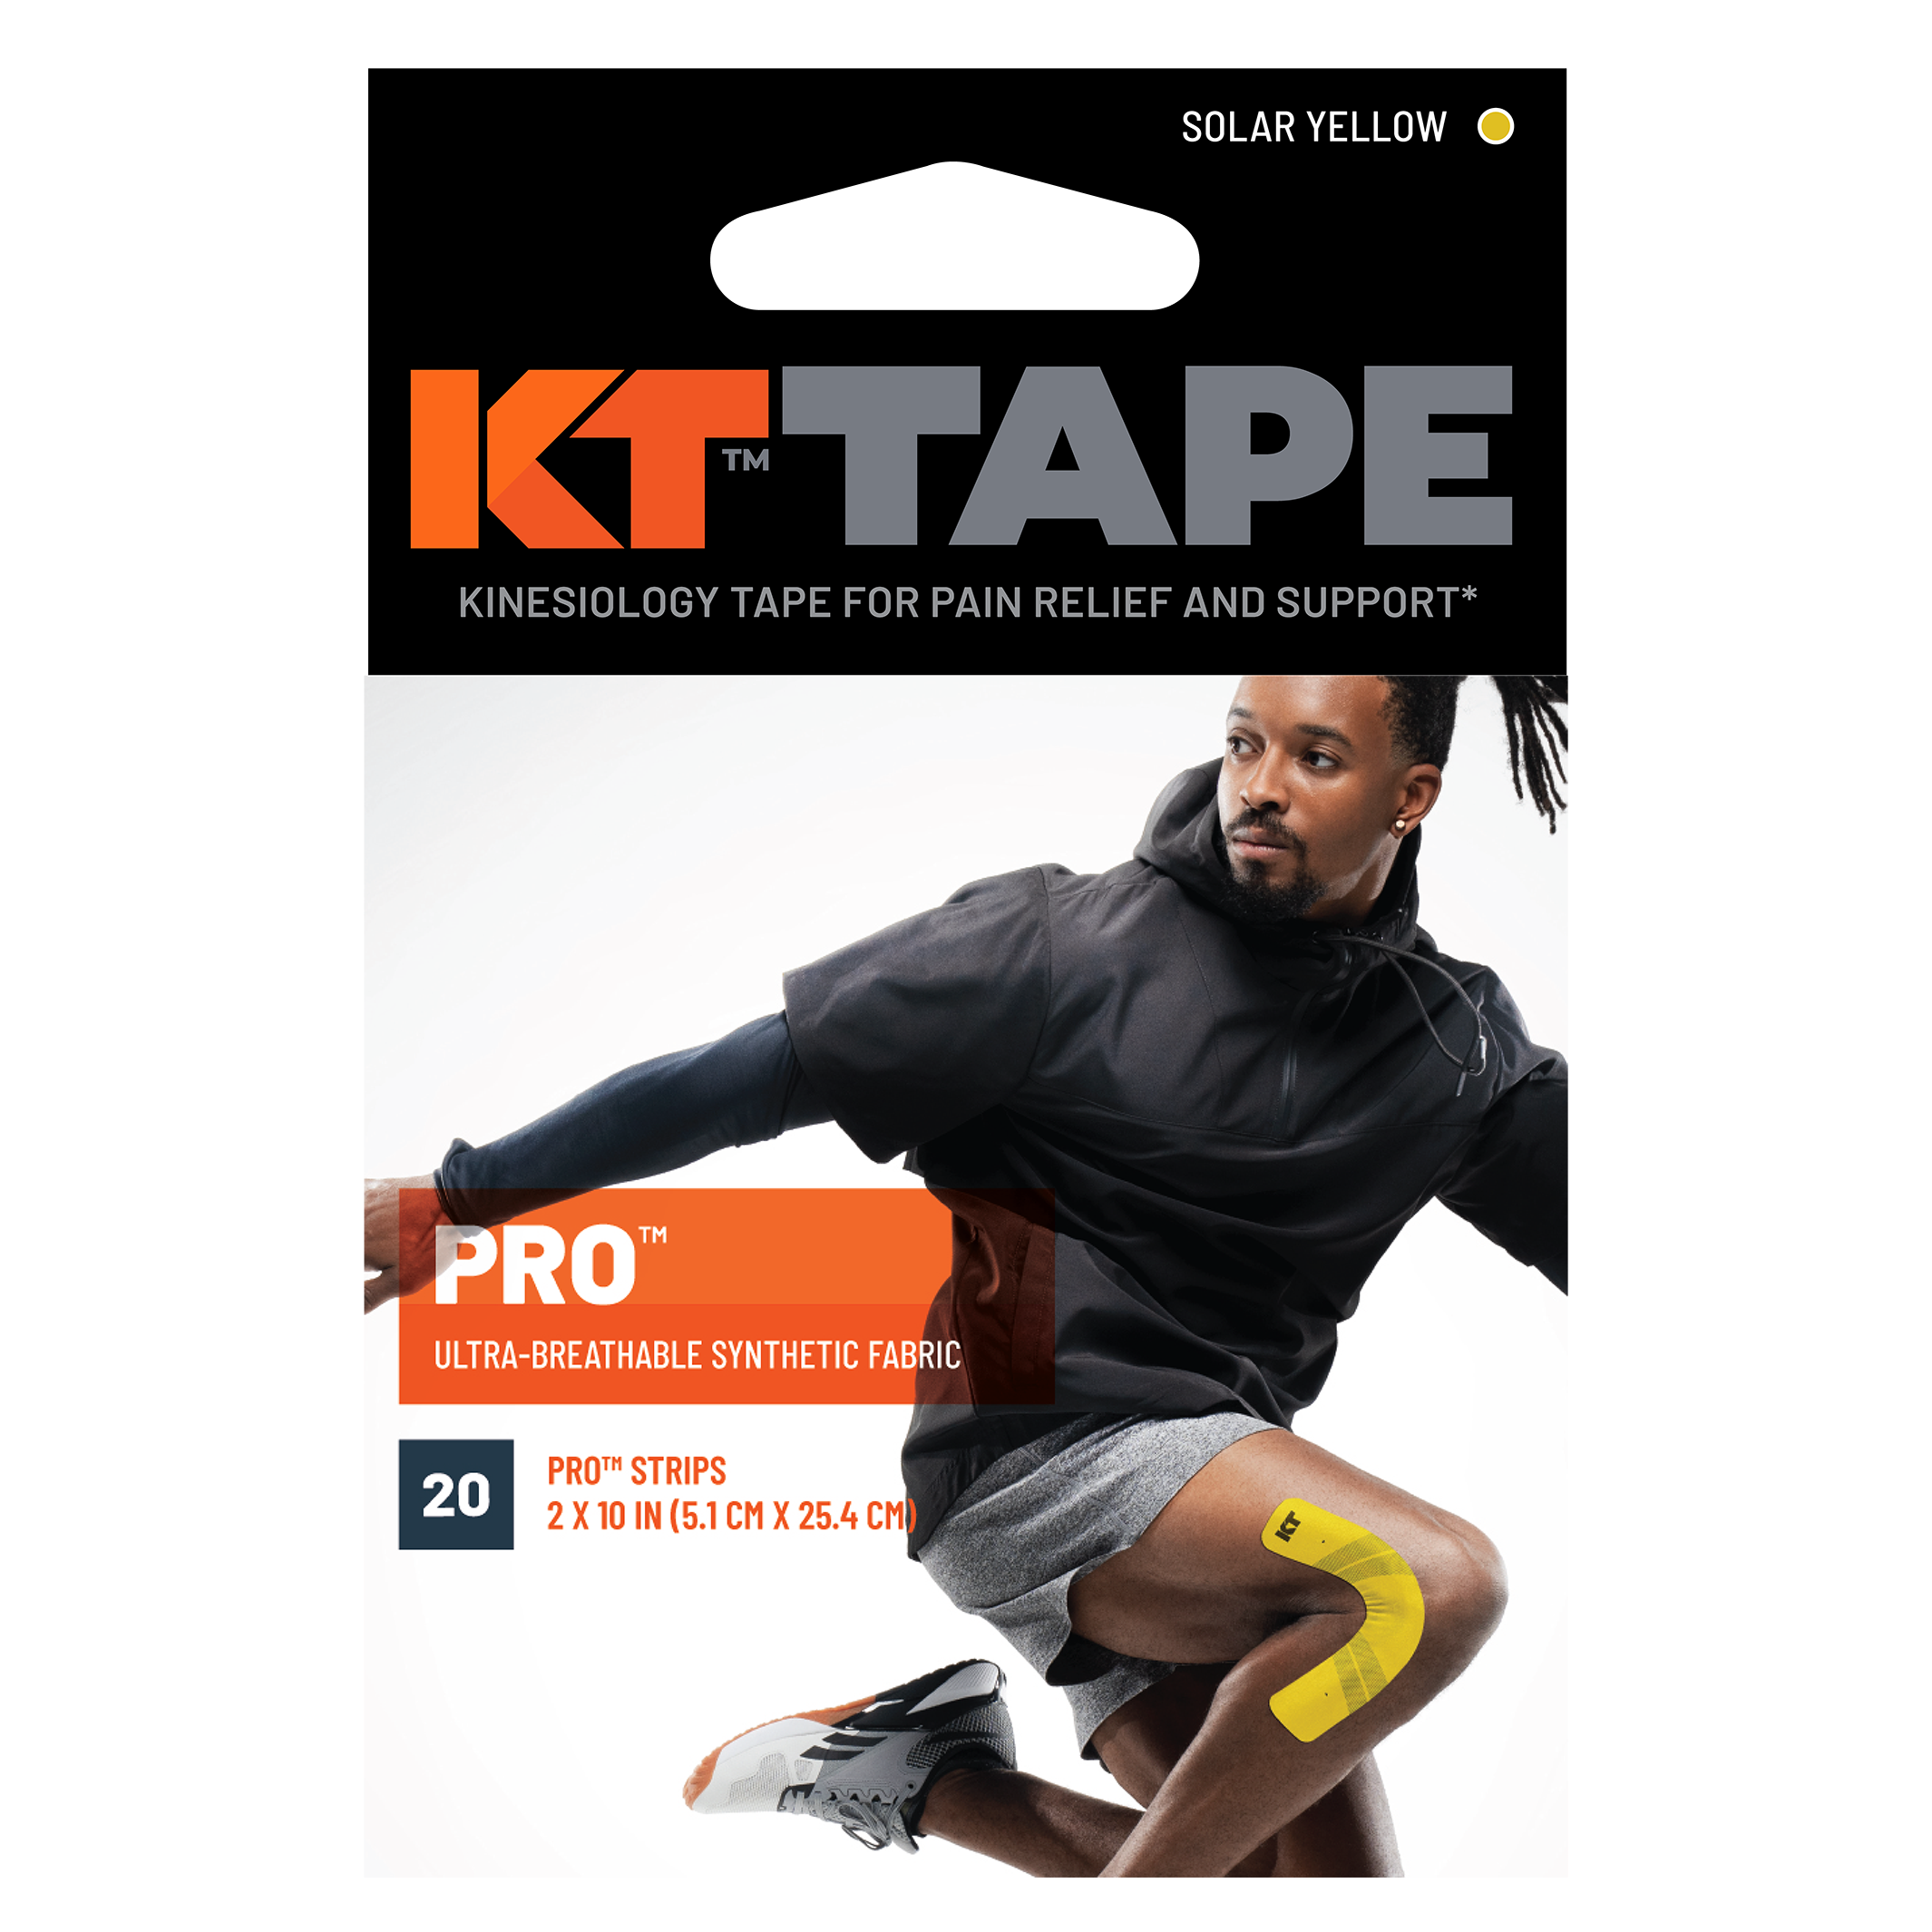 KT Tape Pro packaging#color_solar-yellow